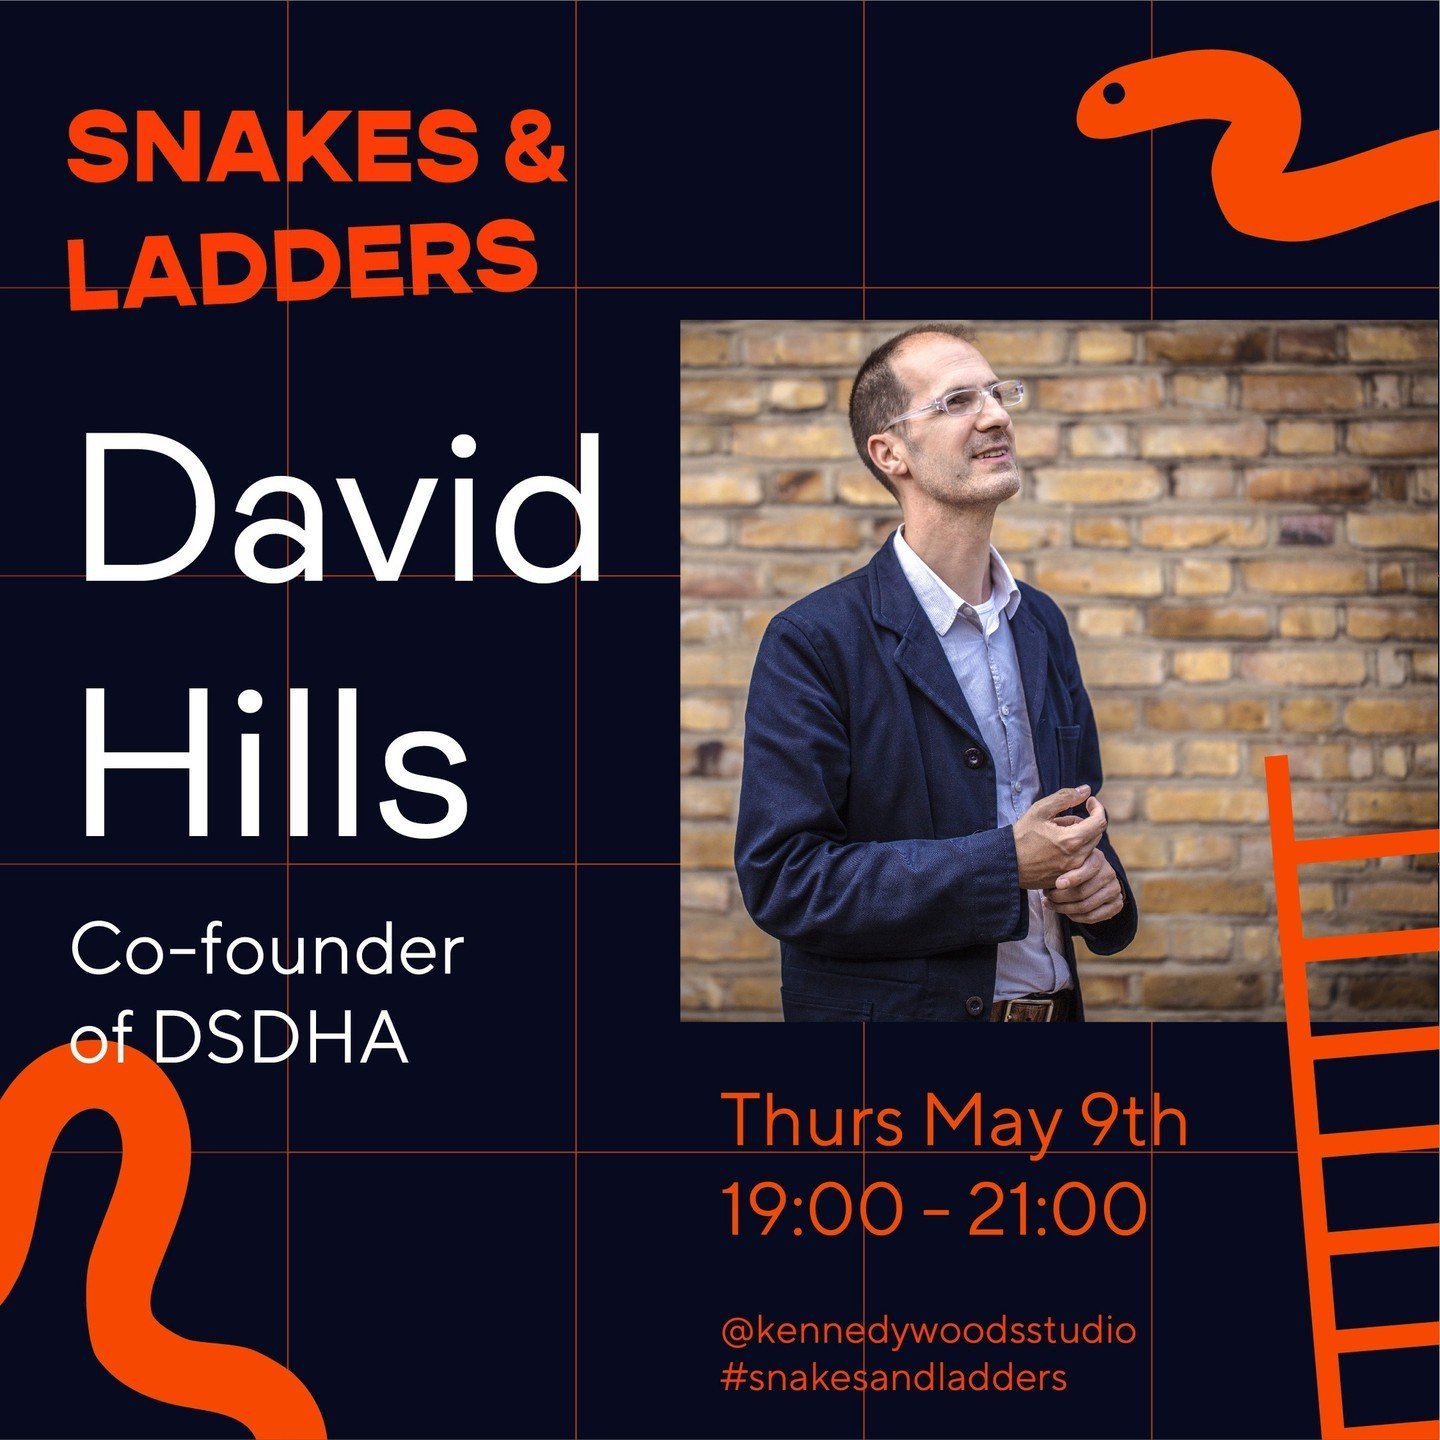 Snakes &amp; Ladders: David Hills (Co-founder of DSDHA) 🐍 🪜⁠
⁠
On Thursday 9th May we welcome David Hills for event No. 6 in our Snakes &amp; Ladders Series! 🎲⁠ ⁠
⁠
Join us to hear David's journey and the lucky breaks and slippery snakes that have